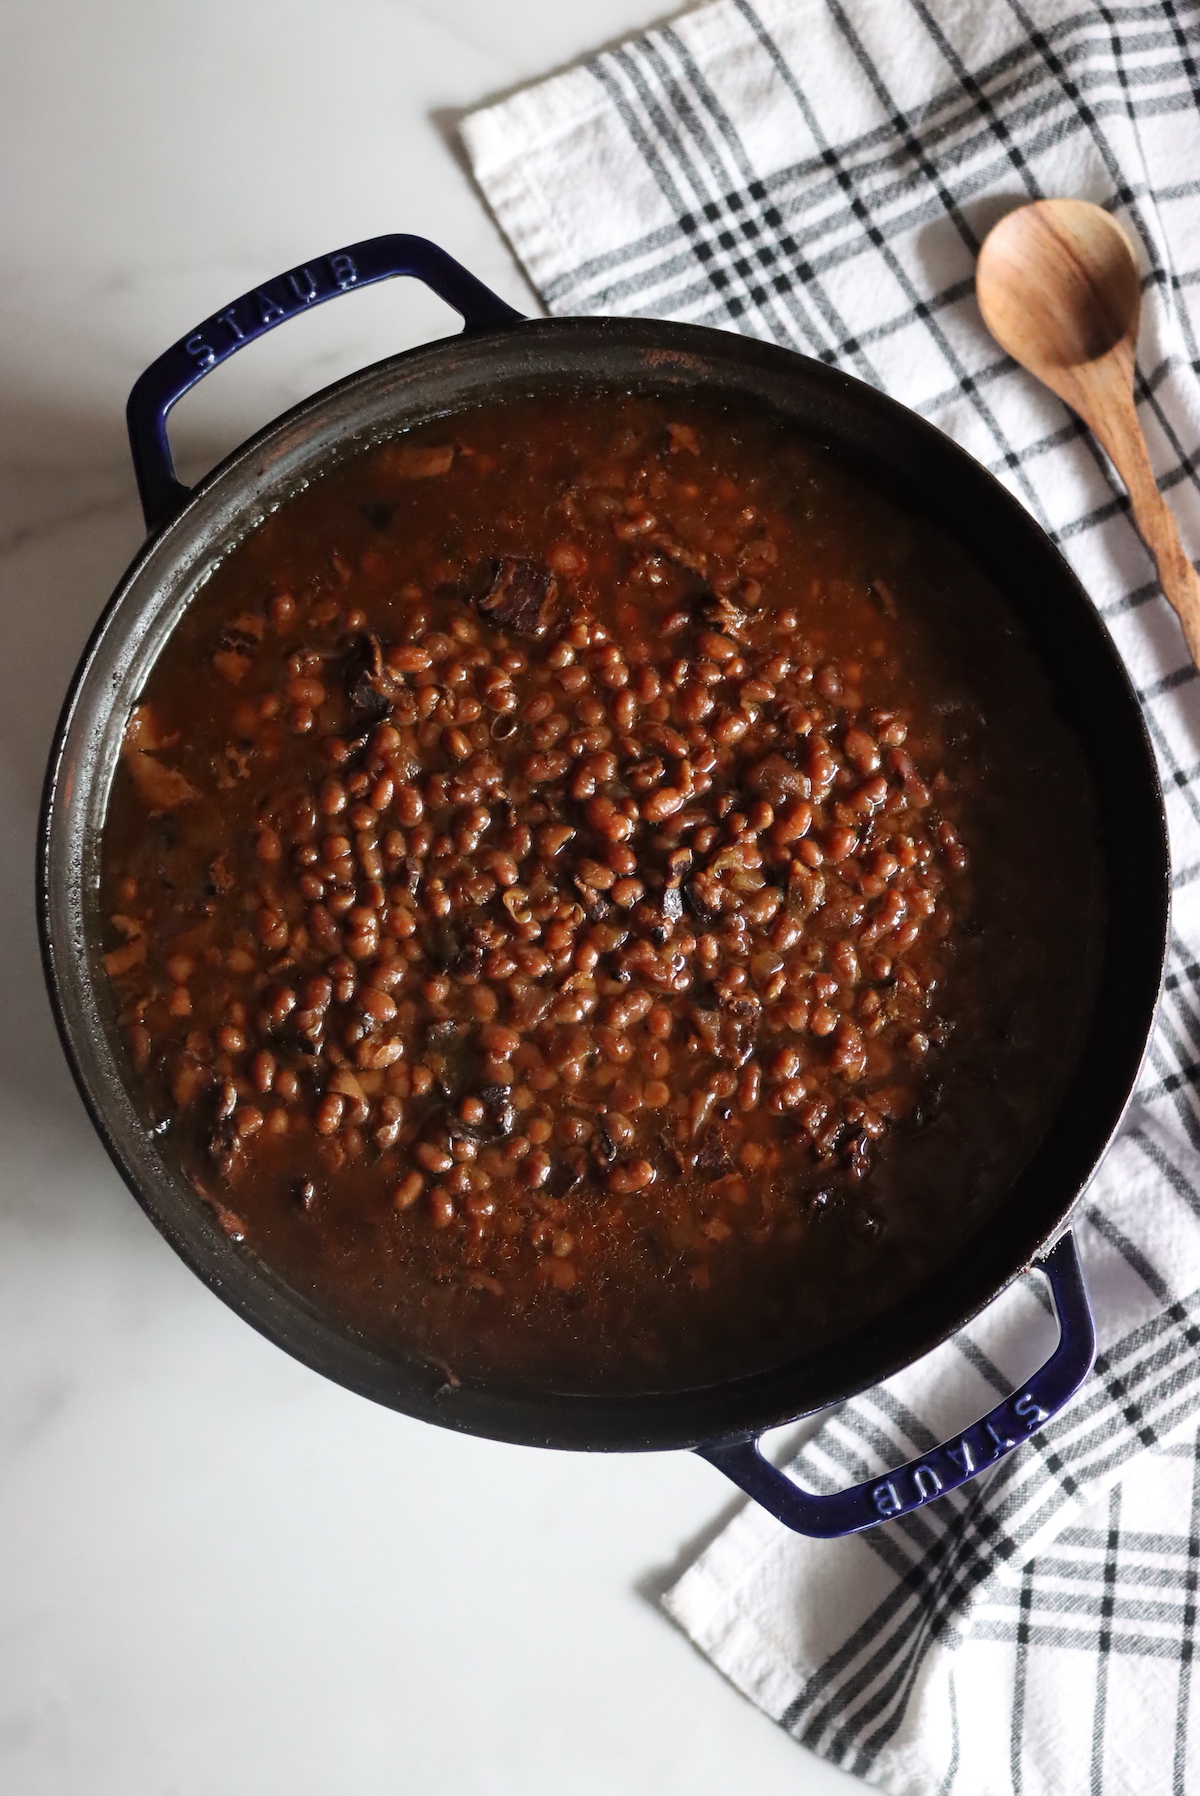 Baked Beans after Baking